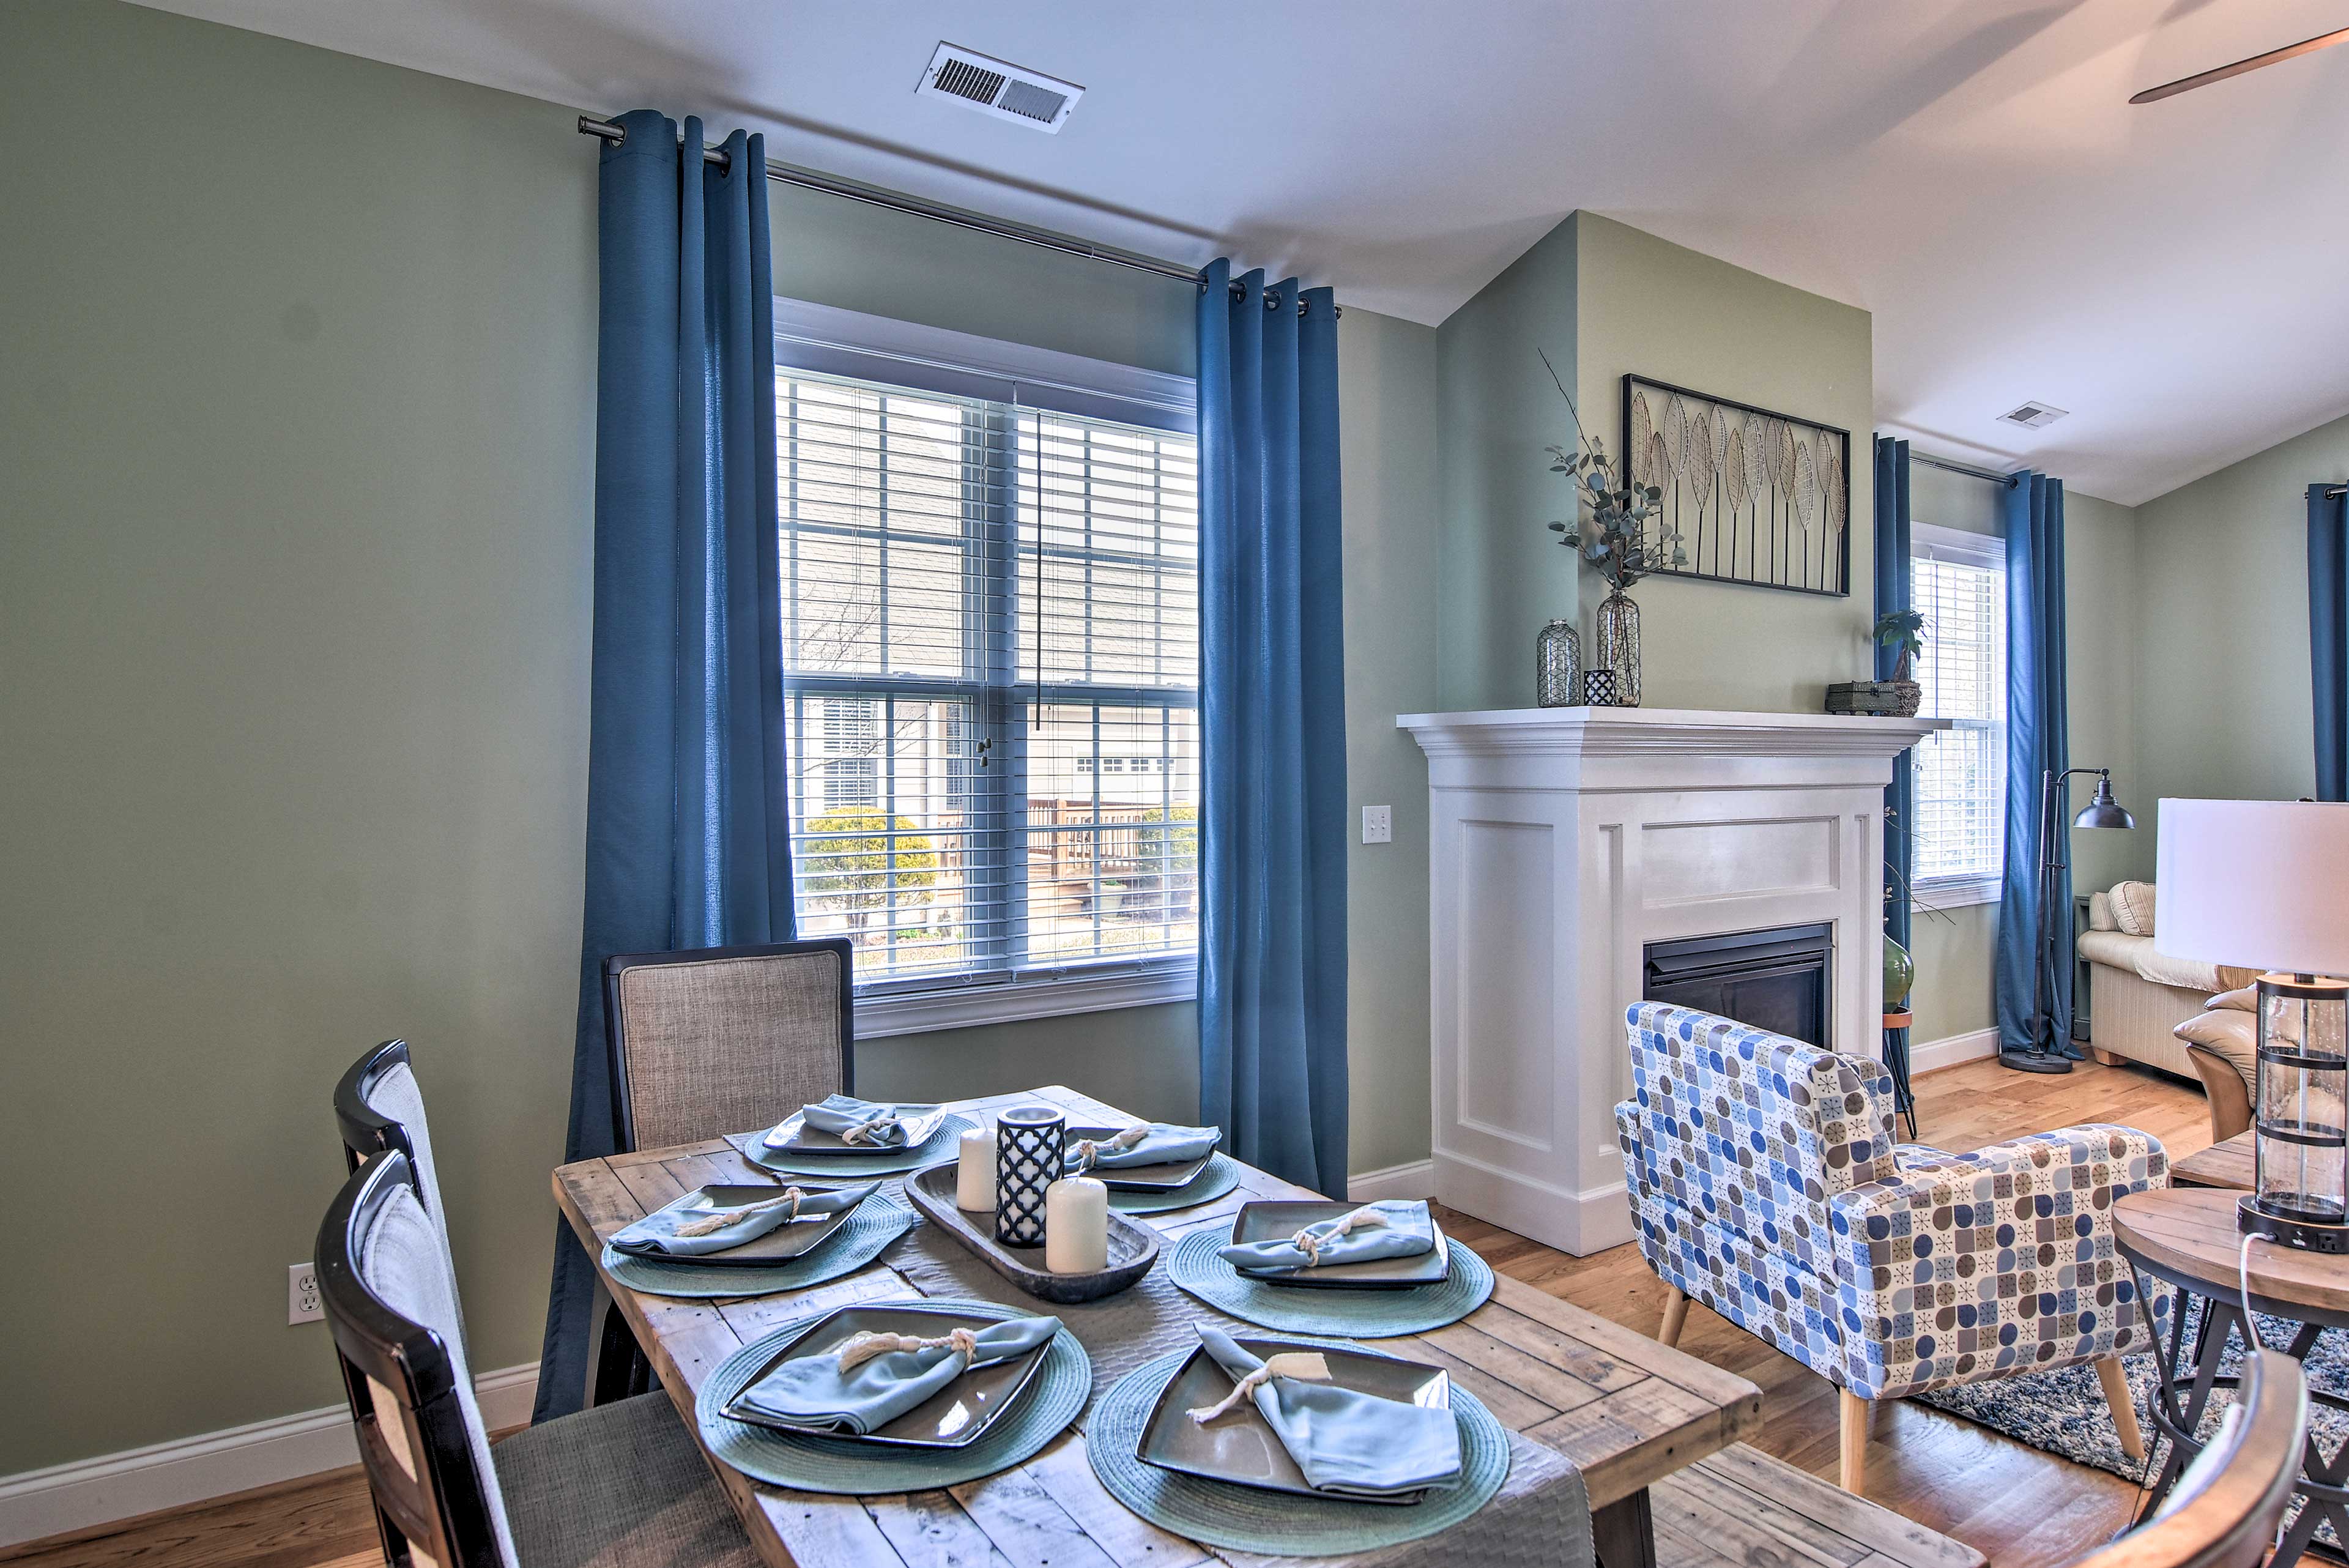 Turn on the fireplace and have a cozy dinner at the farmhouse-style dining table